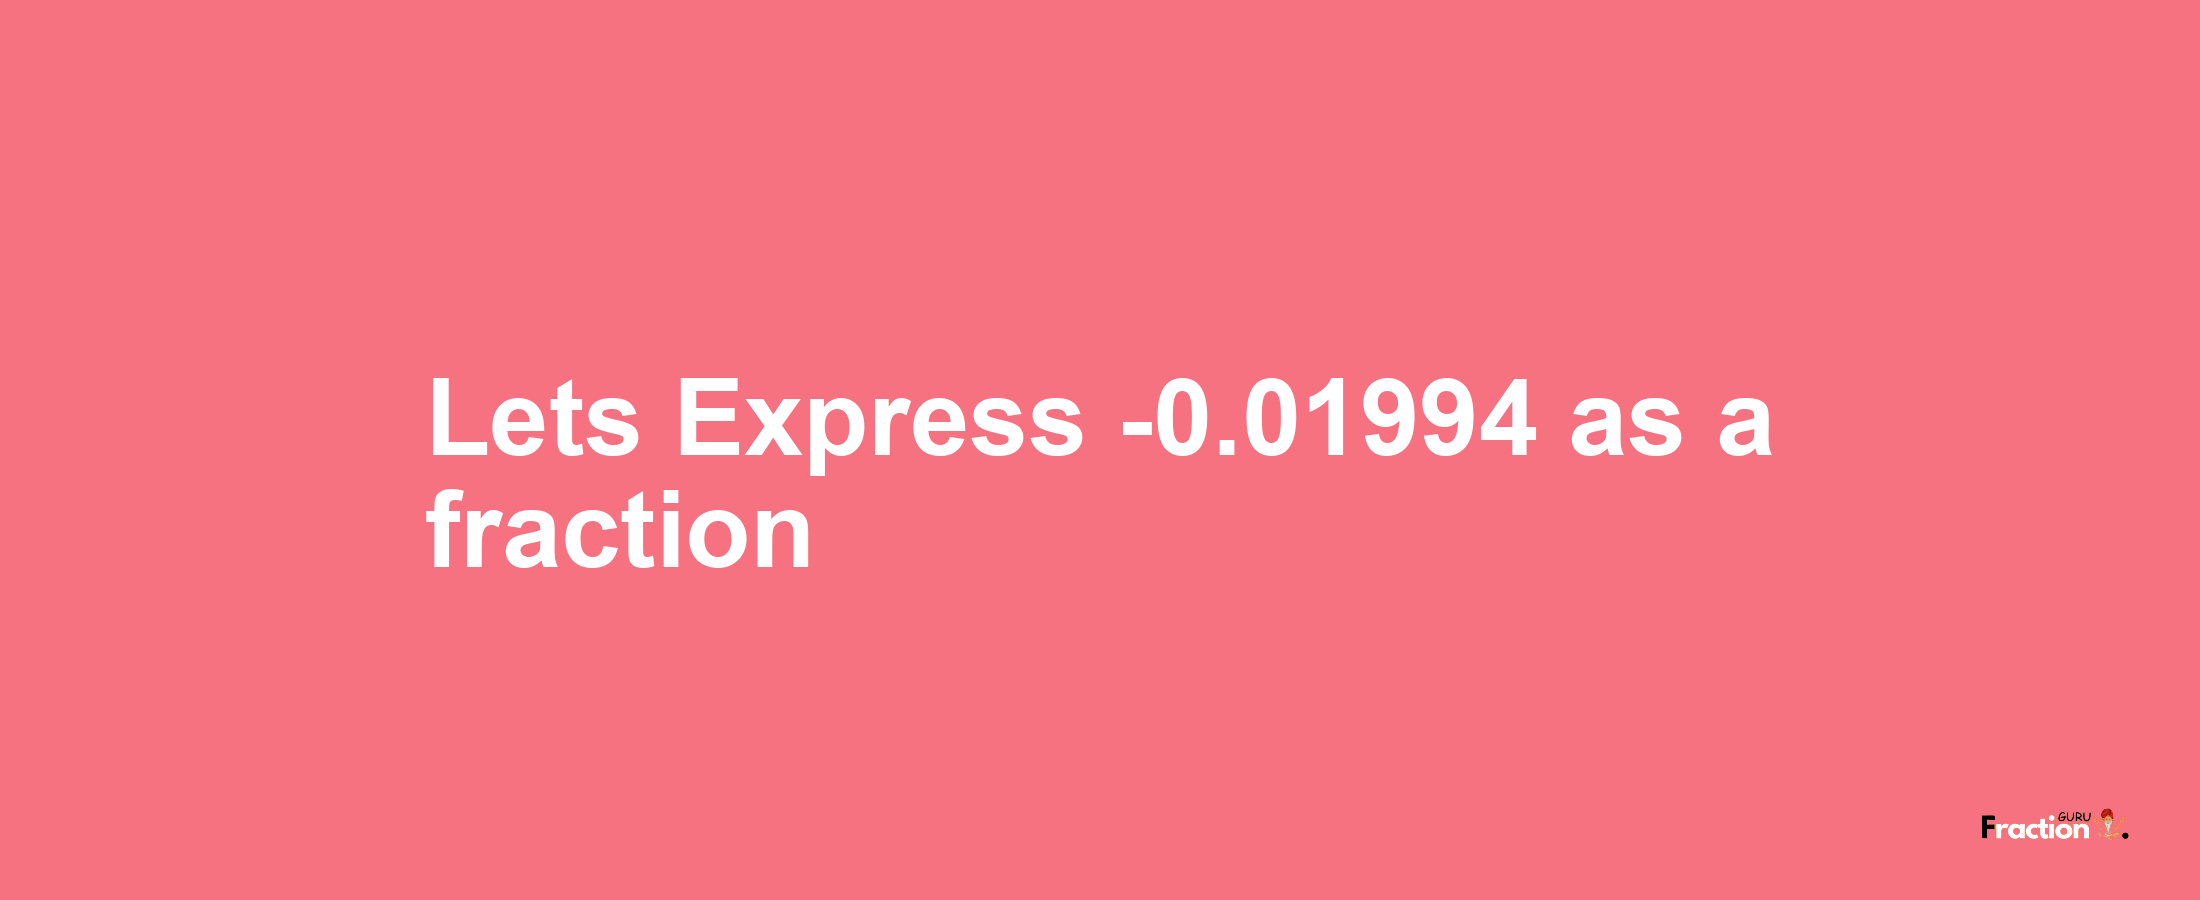 Lets Express -0.01994 as afraction